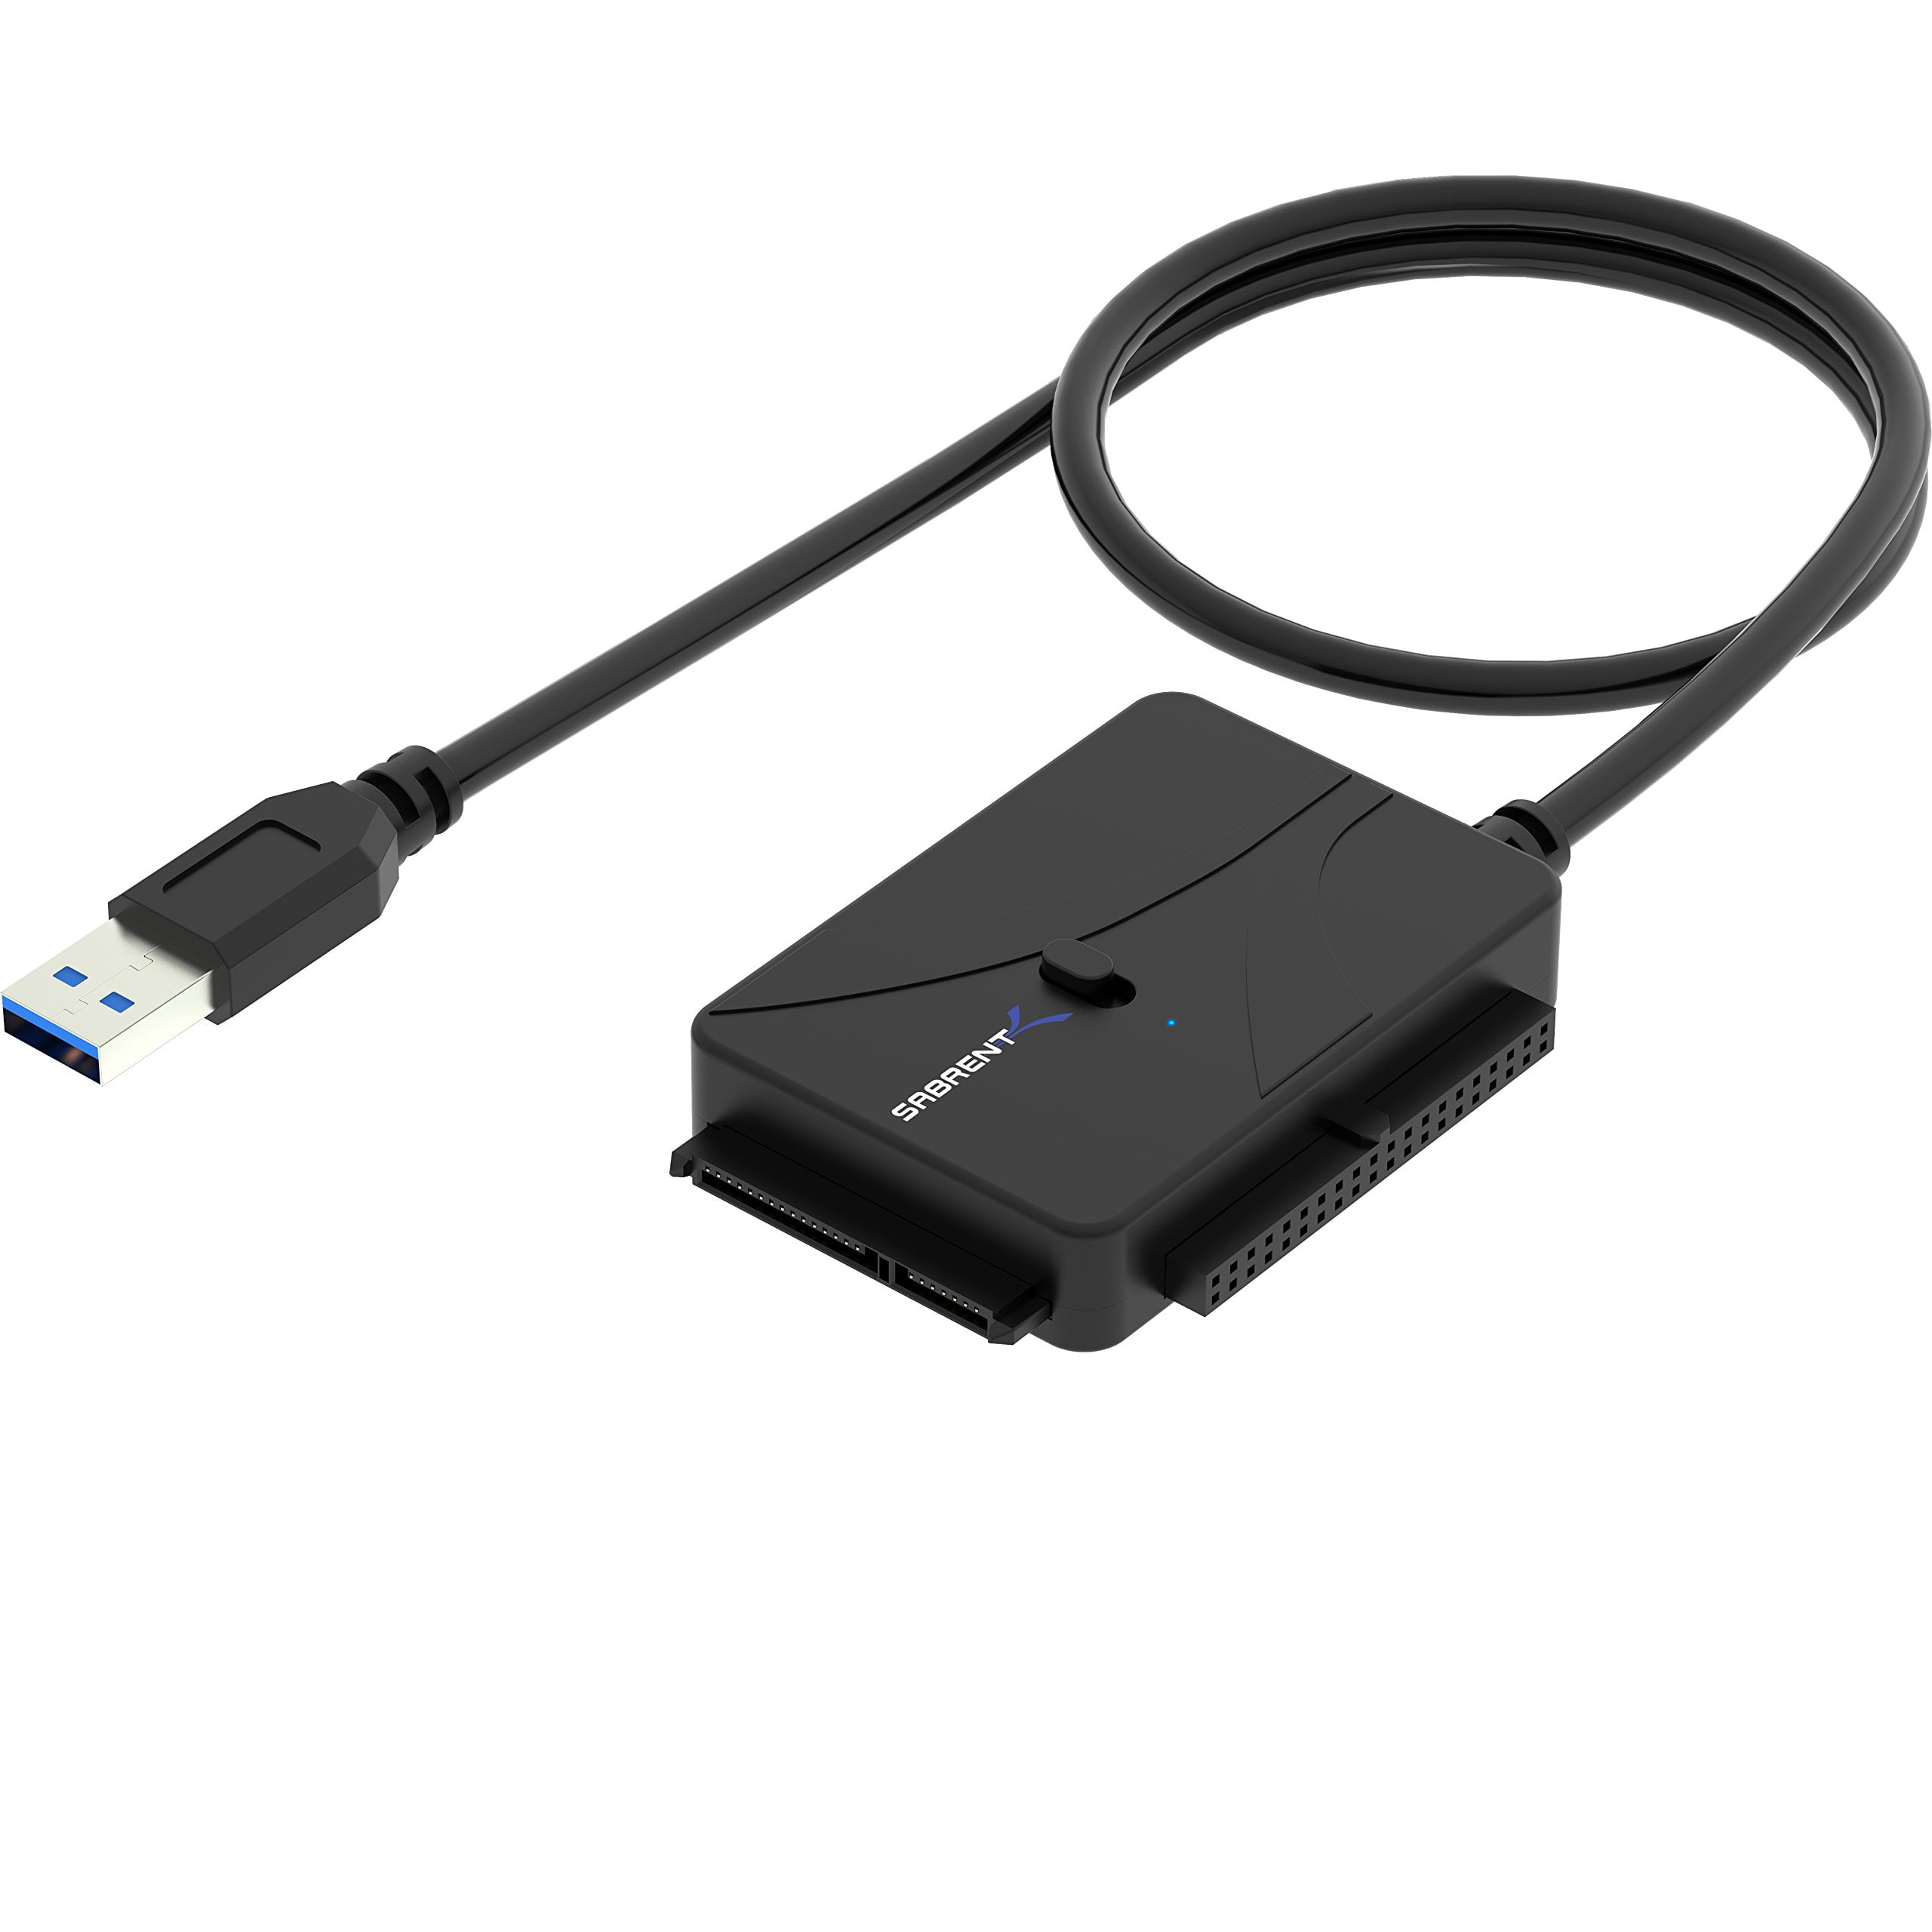 StarTech.com USB 3.0 to SATA IDE Adapter - 2.5in / 3.5in - External Hard  Drive to USB Converter - Hard Drive Transfer Cable (USB3SSATAIDE) - storage  controller - ATA / SATA - USB 3.0